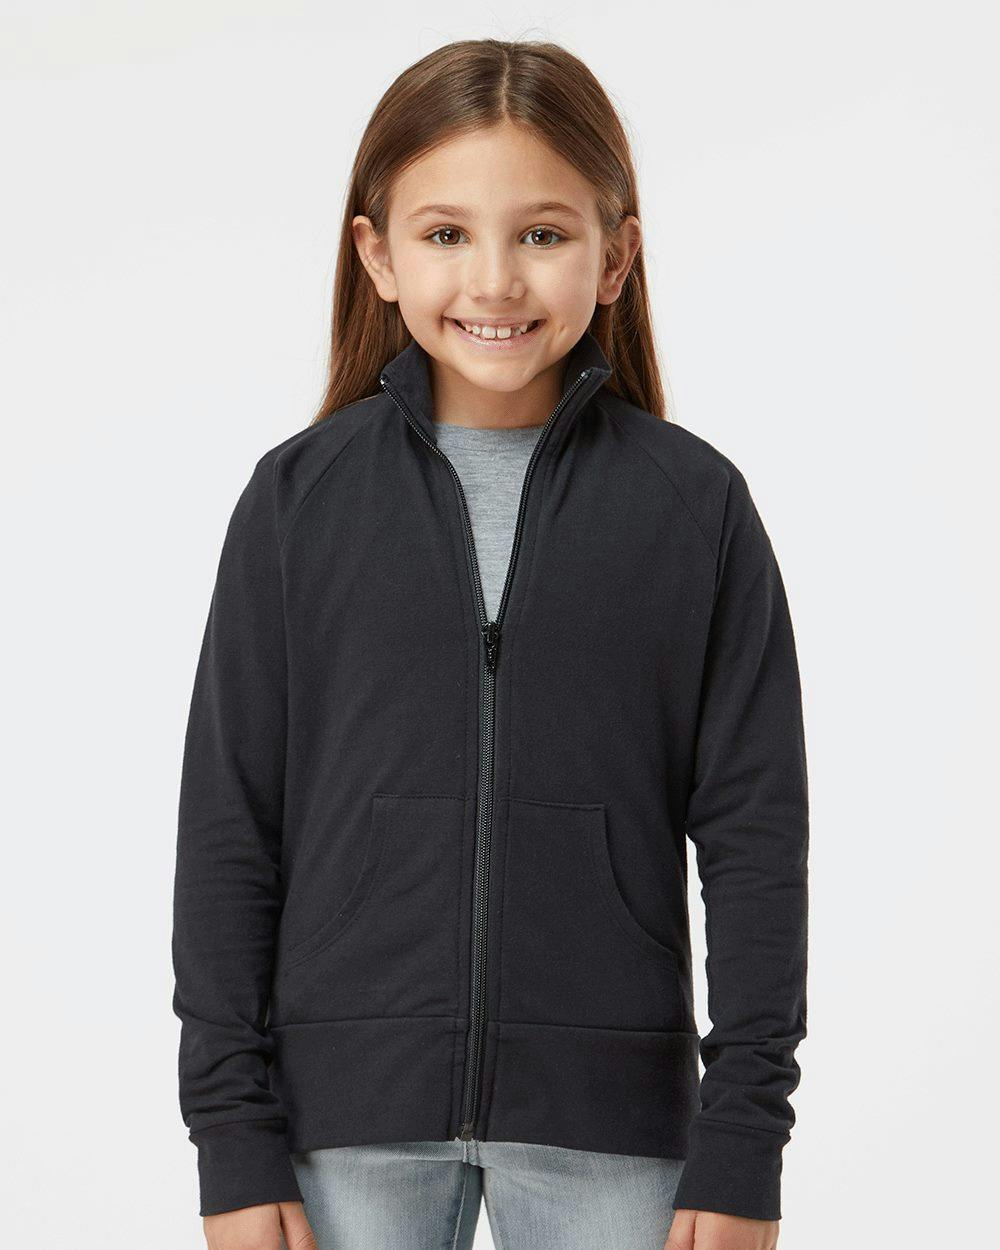 Image for Girls' Practice Jacket - S89Y